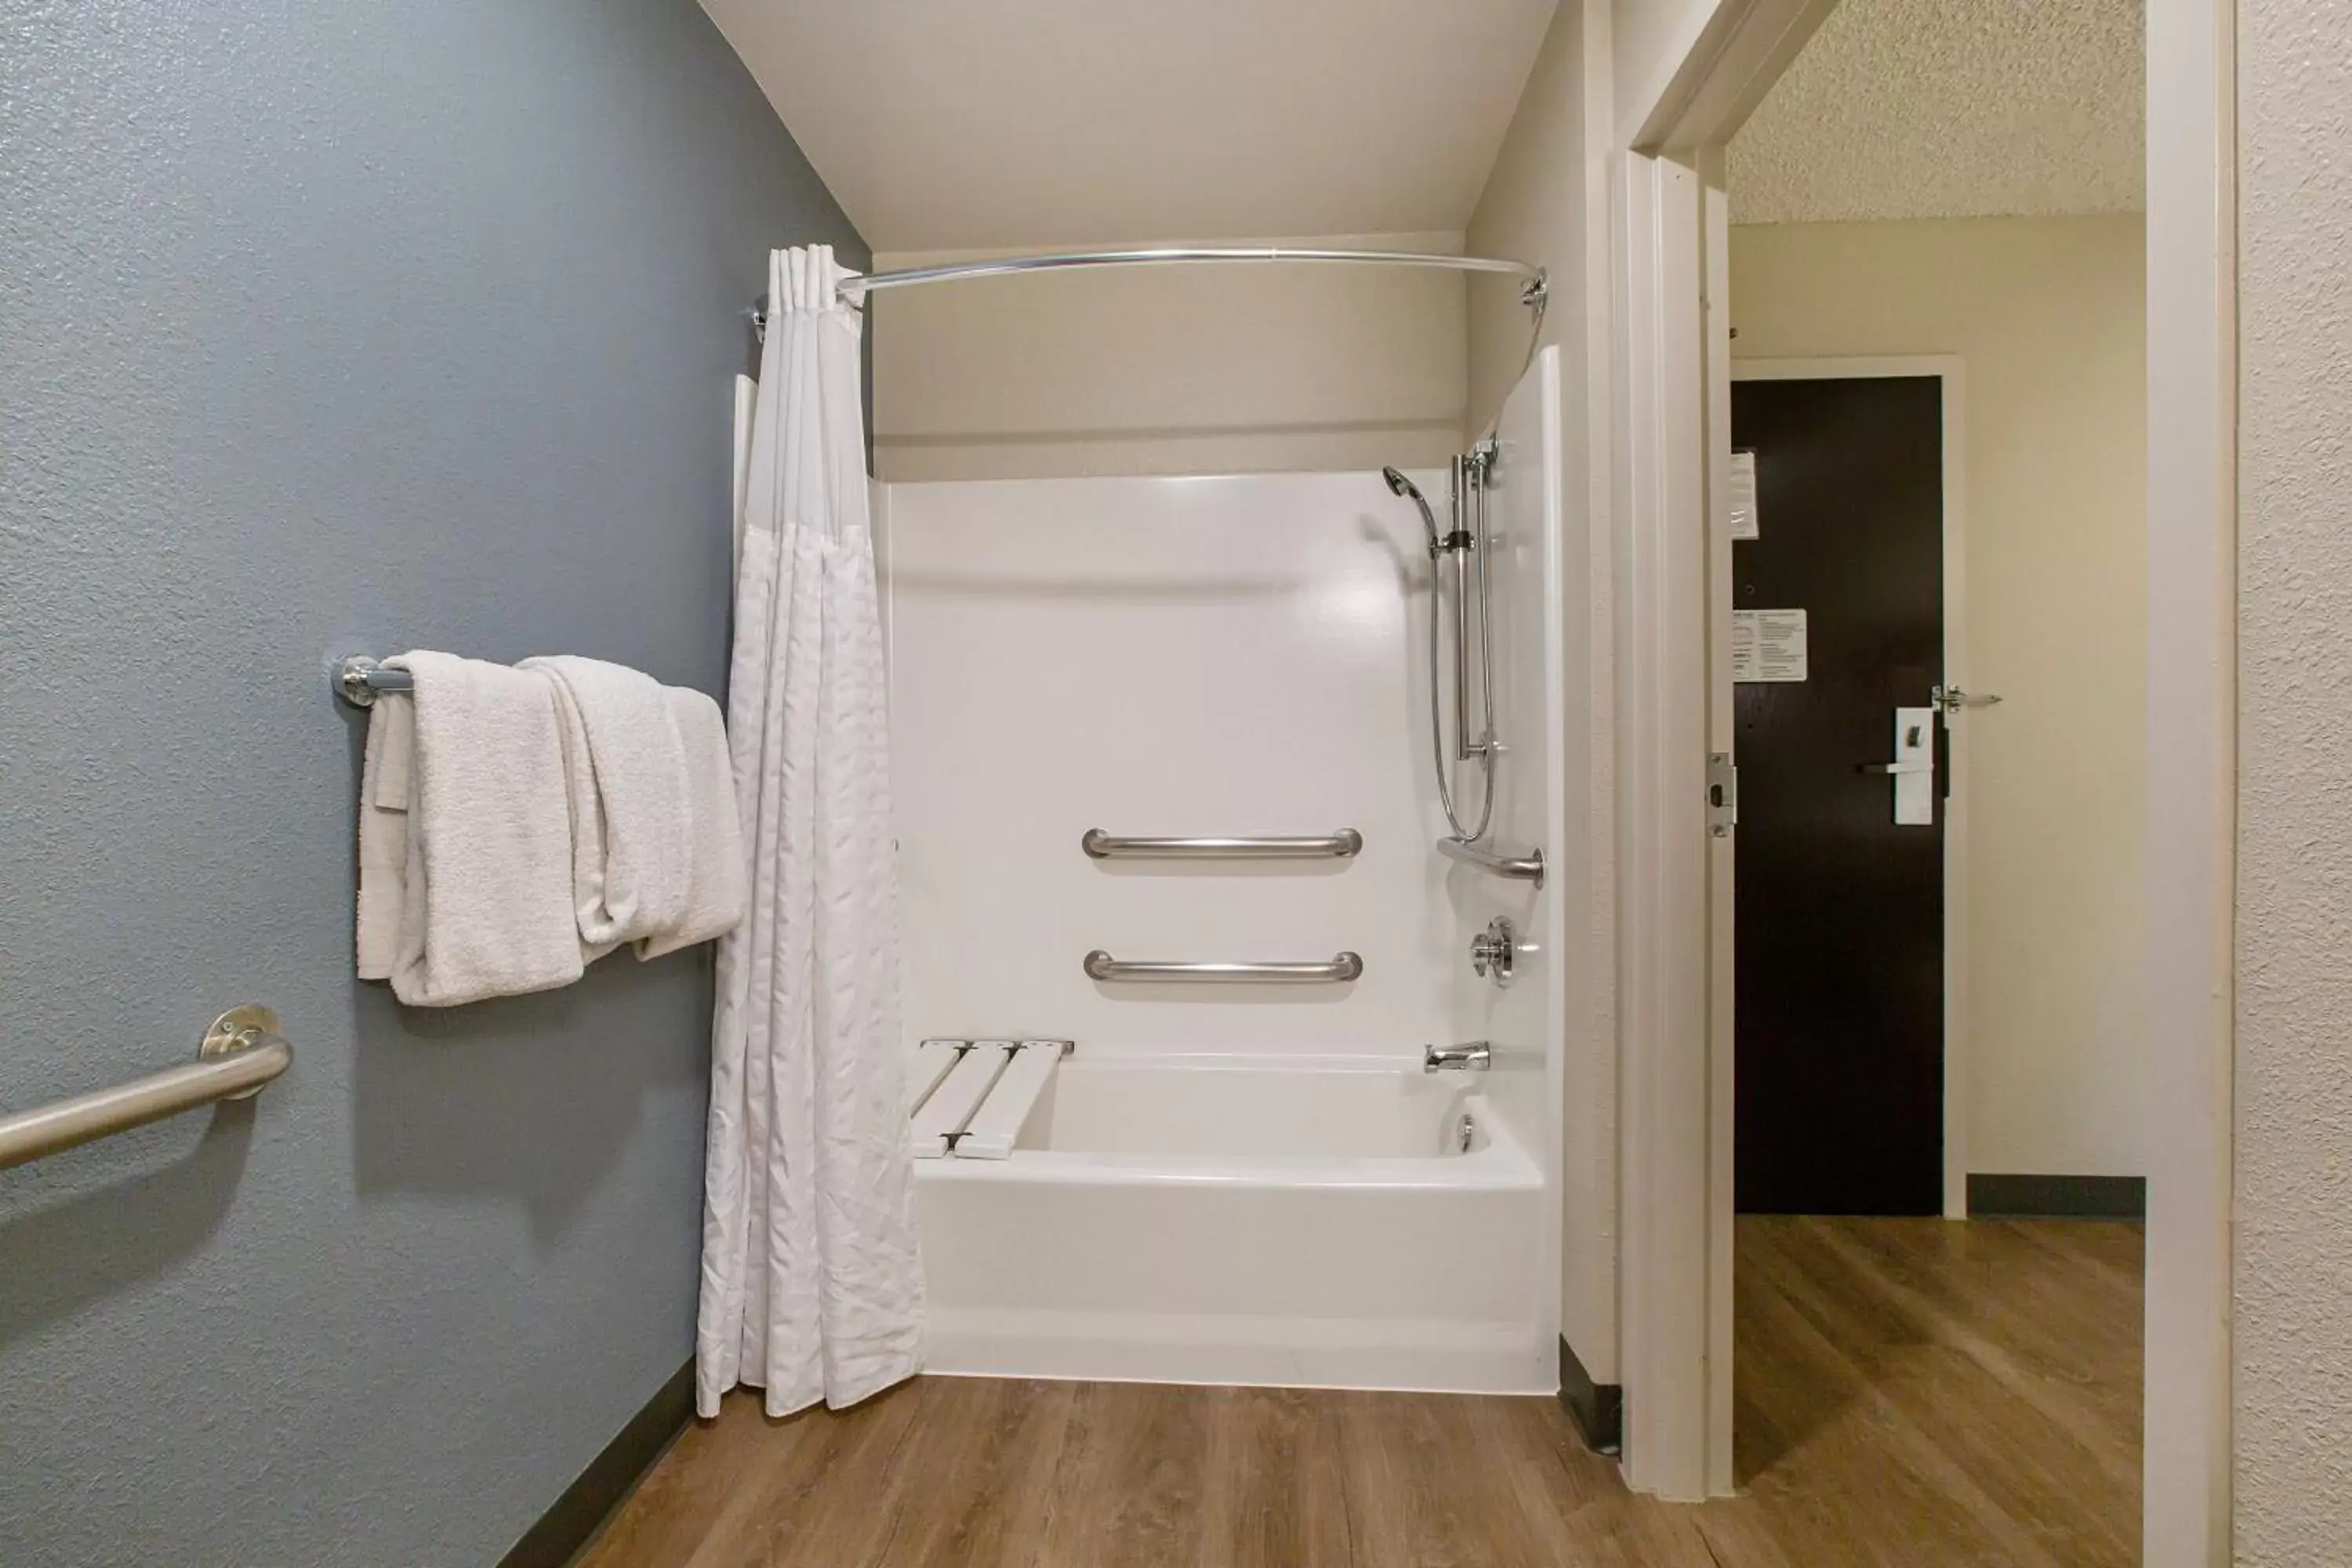 Bathroom in Extended Stay America Premier Suites - Union City - Dyer St